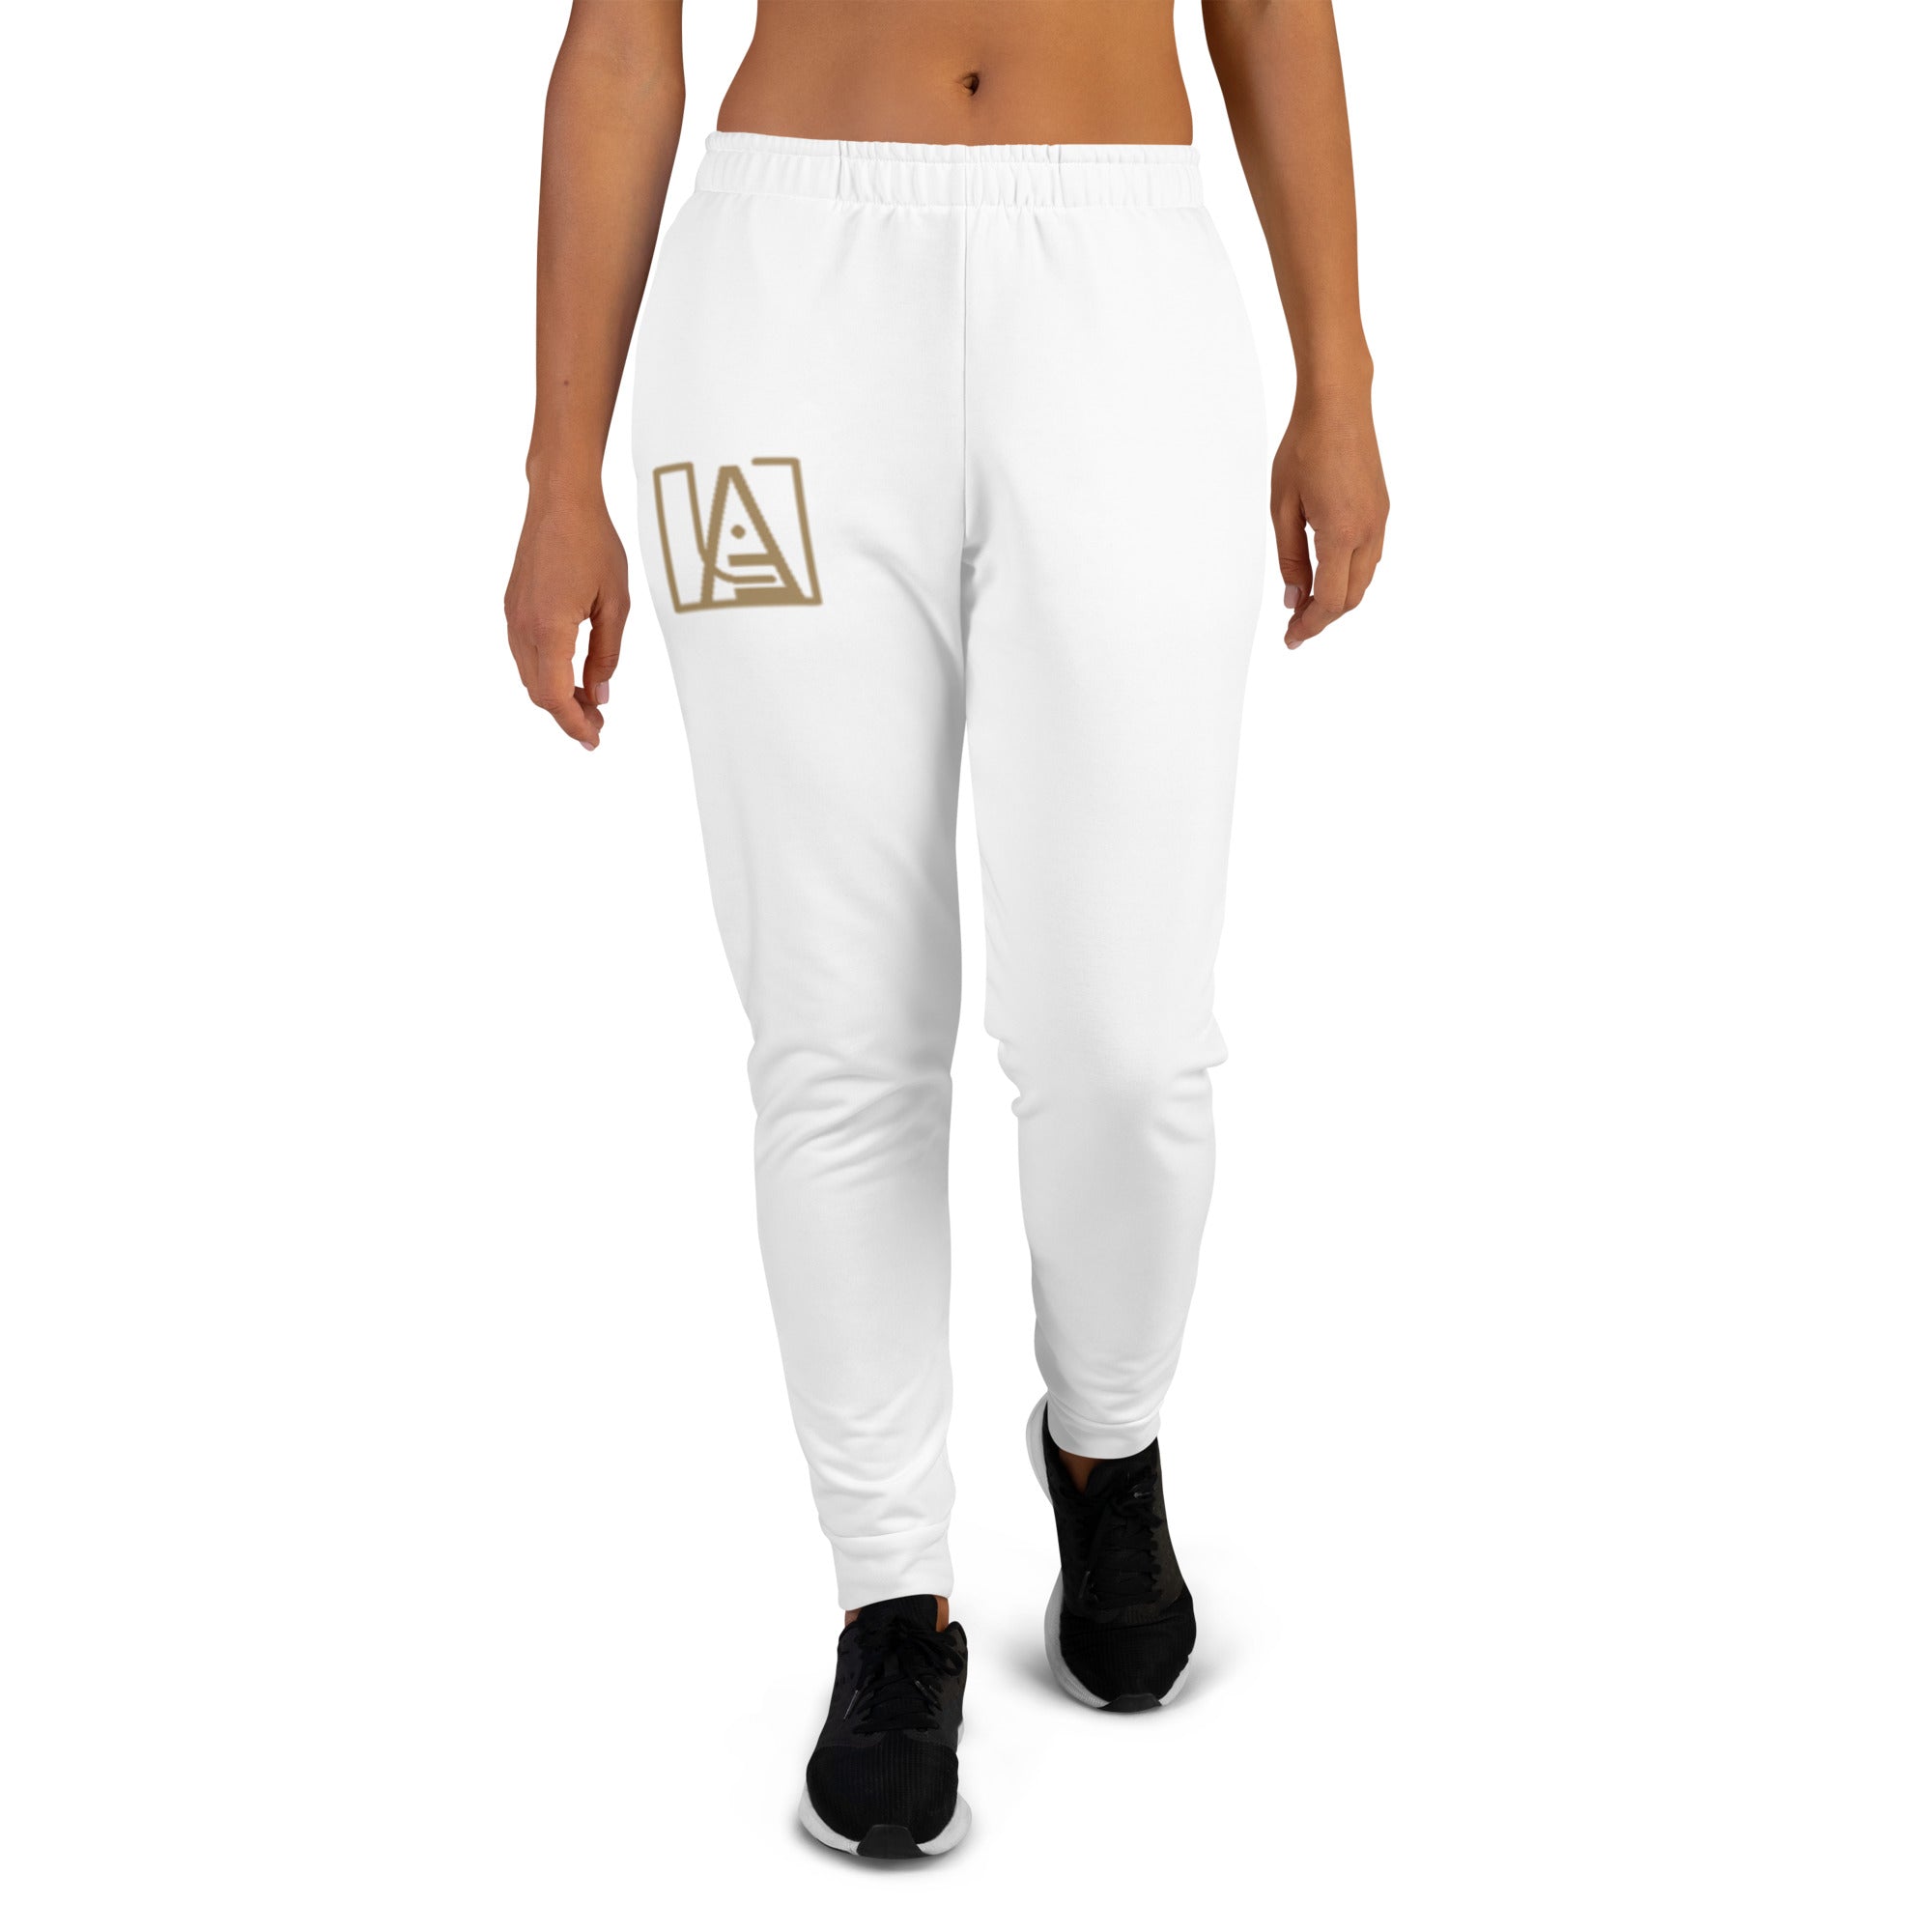 ICONIC Women's Joggers in White